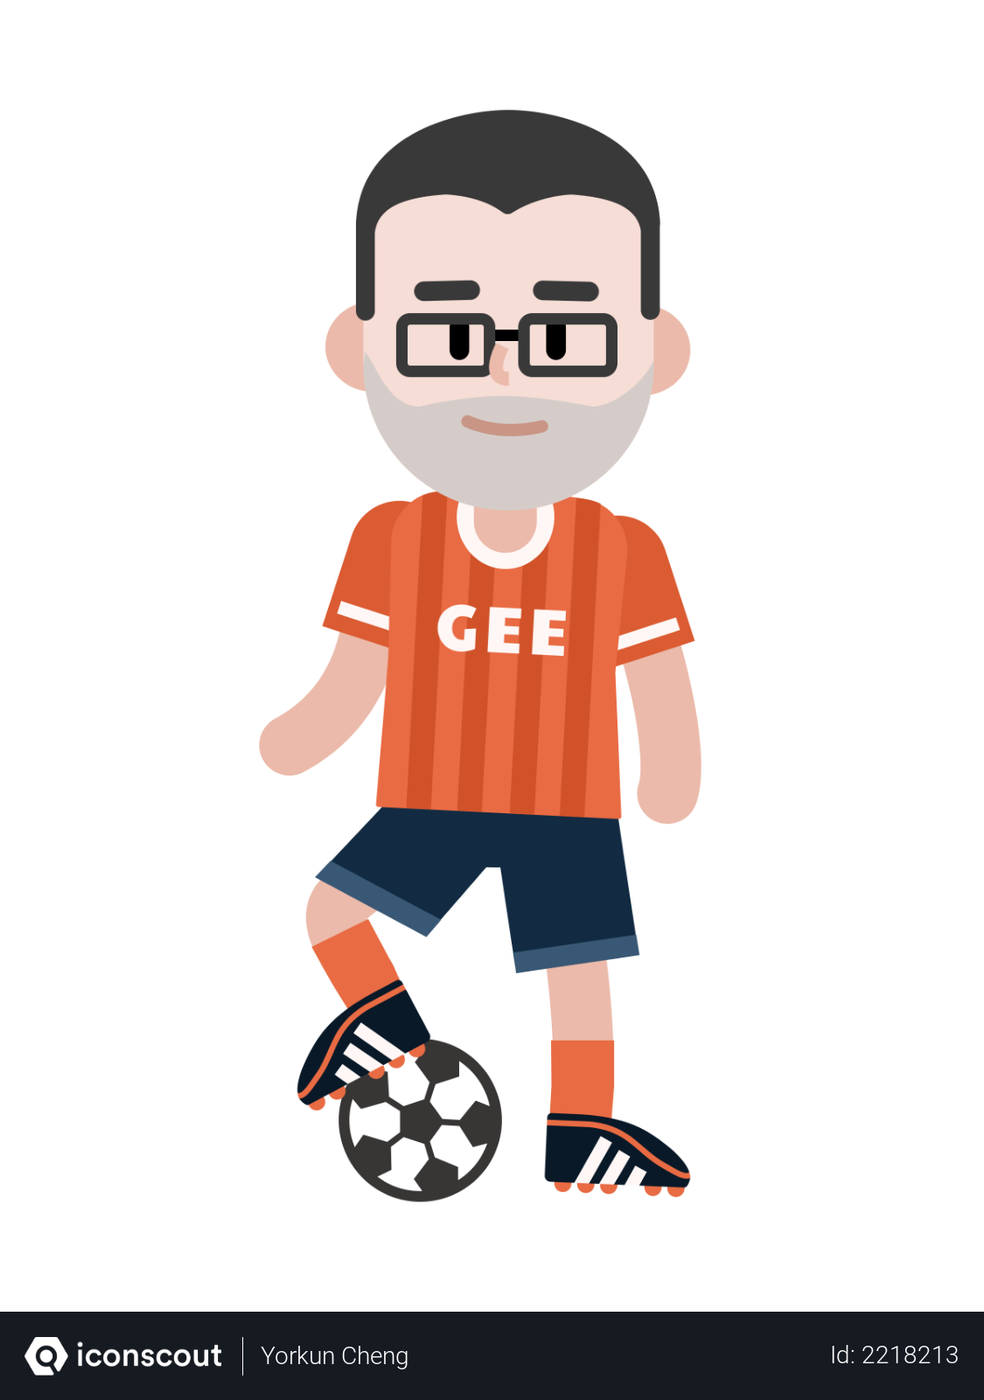 Best Free Football player Illustration download in PNG & Vector format